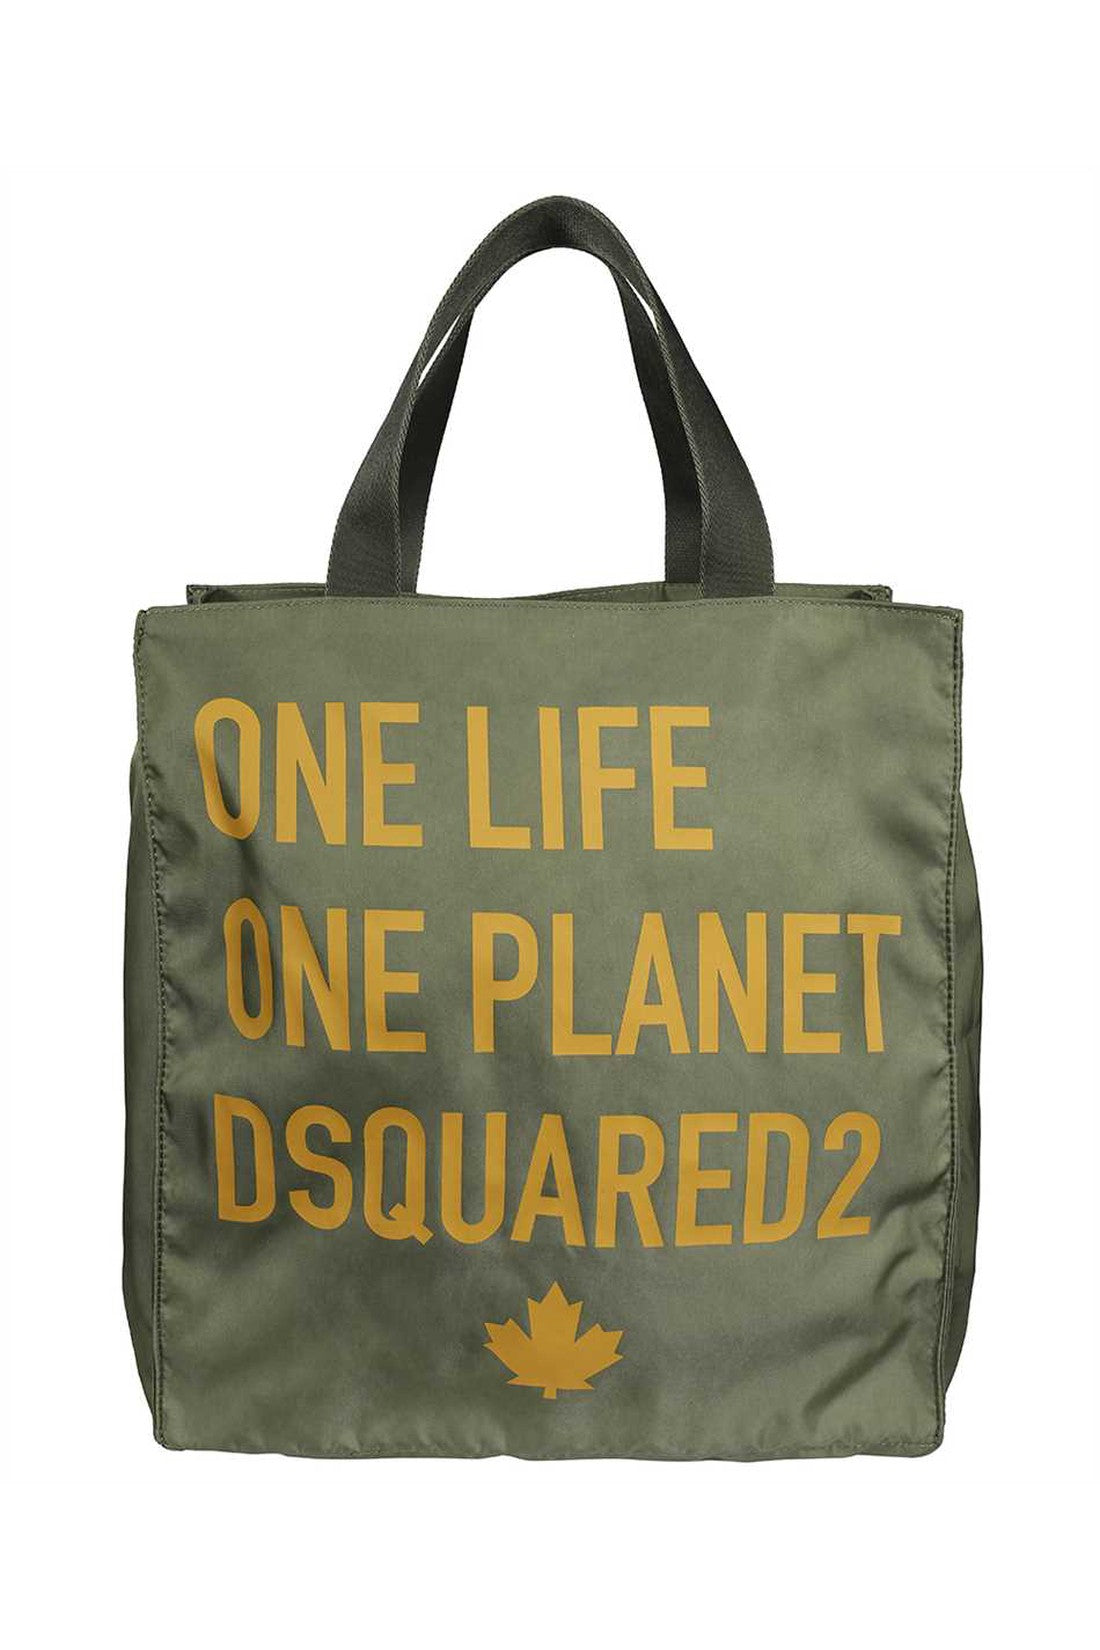 Dsquared2-OUTLET-SALE-Tote-bag-Taschen-TU-ARCHIVE-COLLECTION.jpg